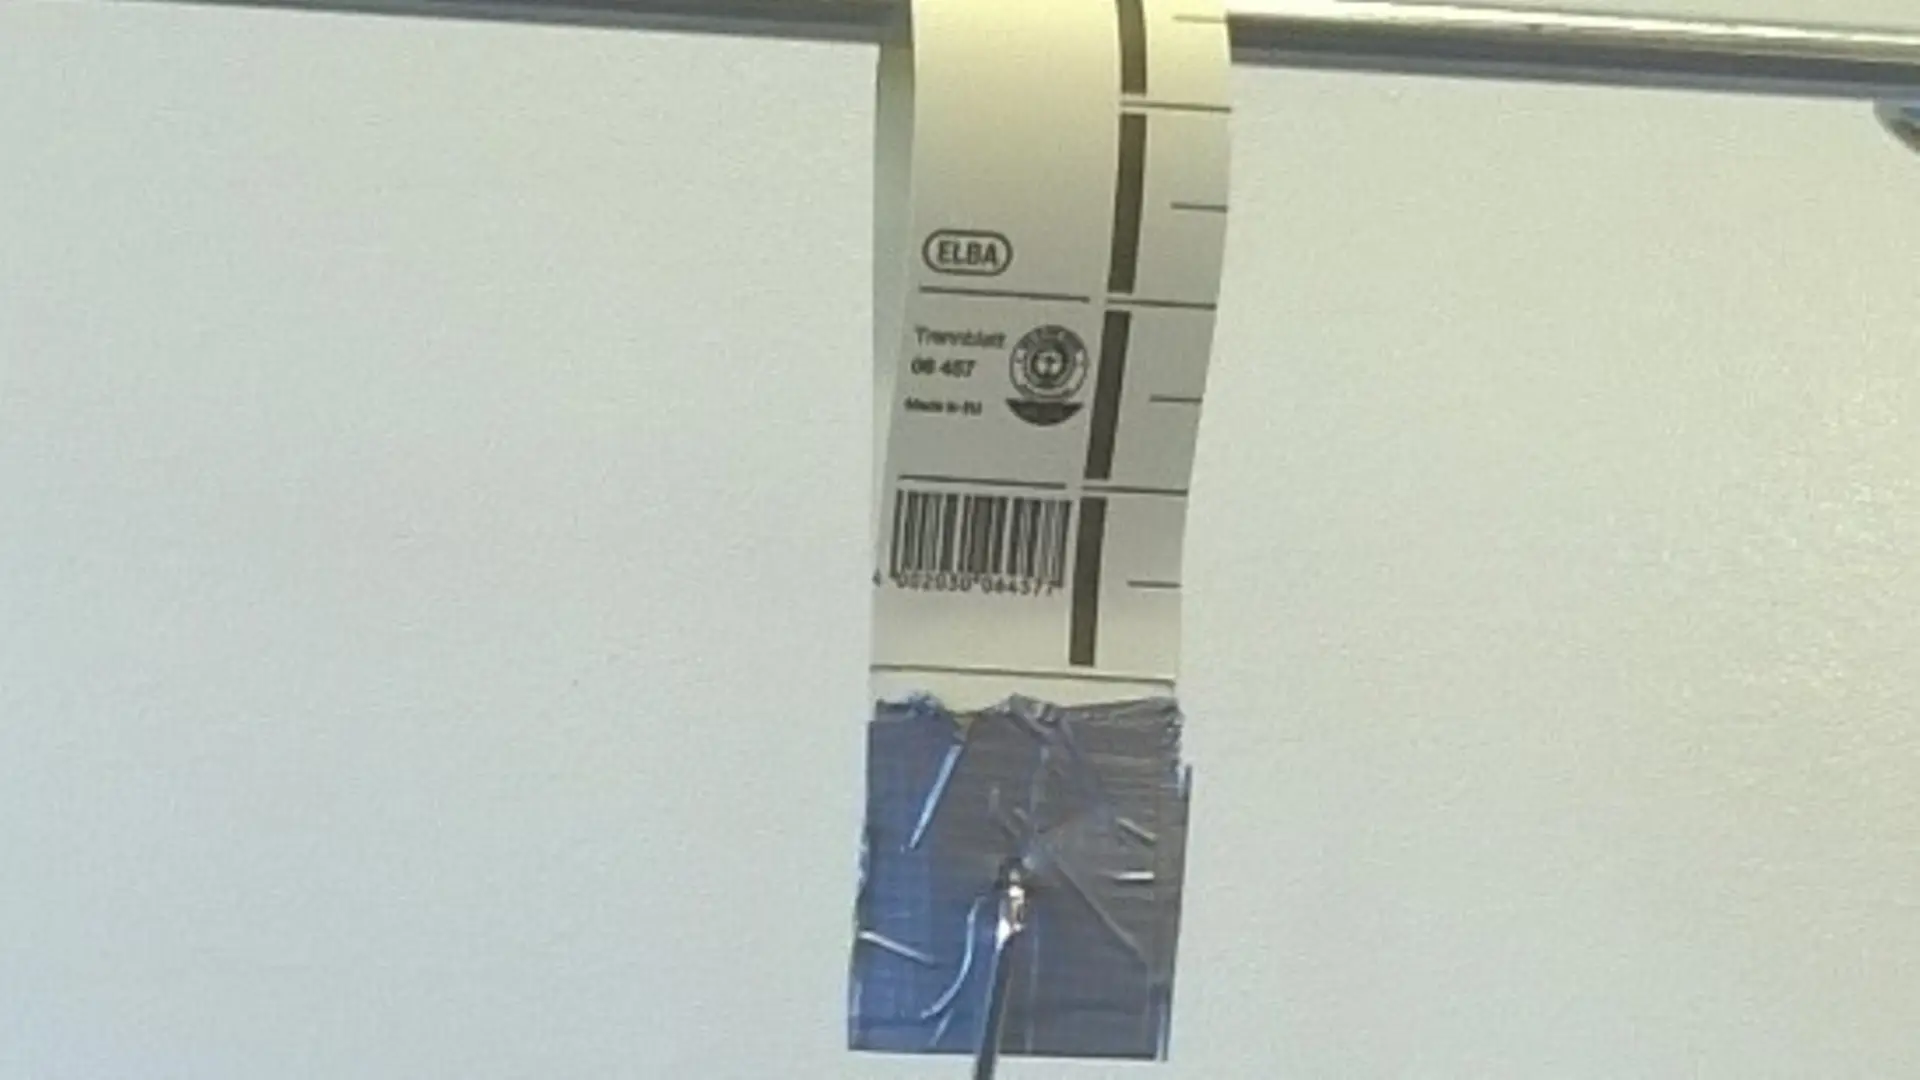 Paper loop hanging from a metal rod